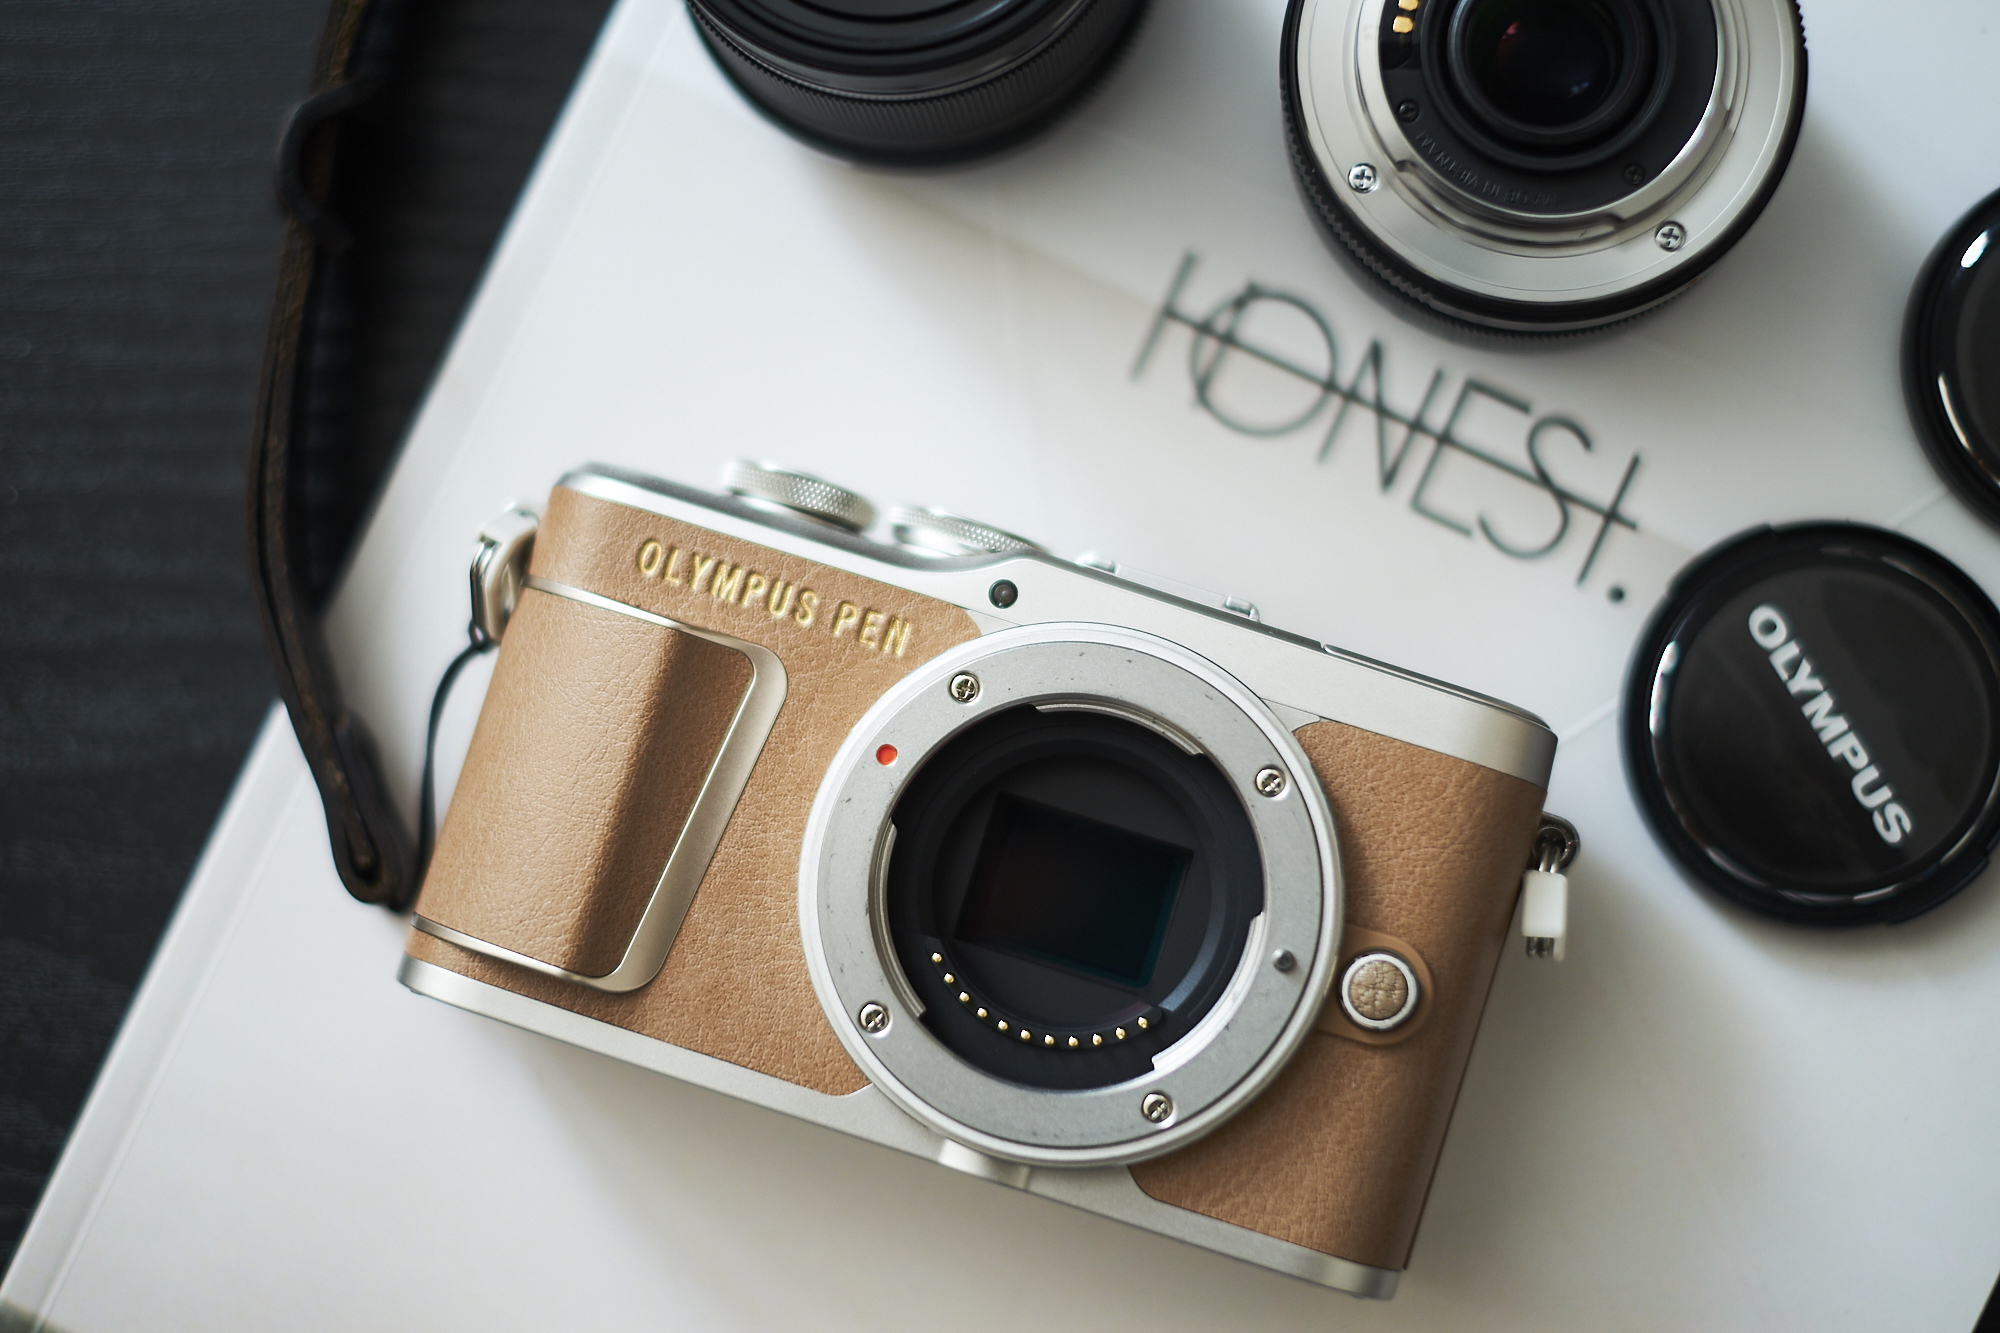 Review: Olympus EPL9 (Why and How I Fell Back in Love With Olympus)